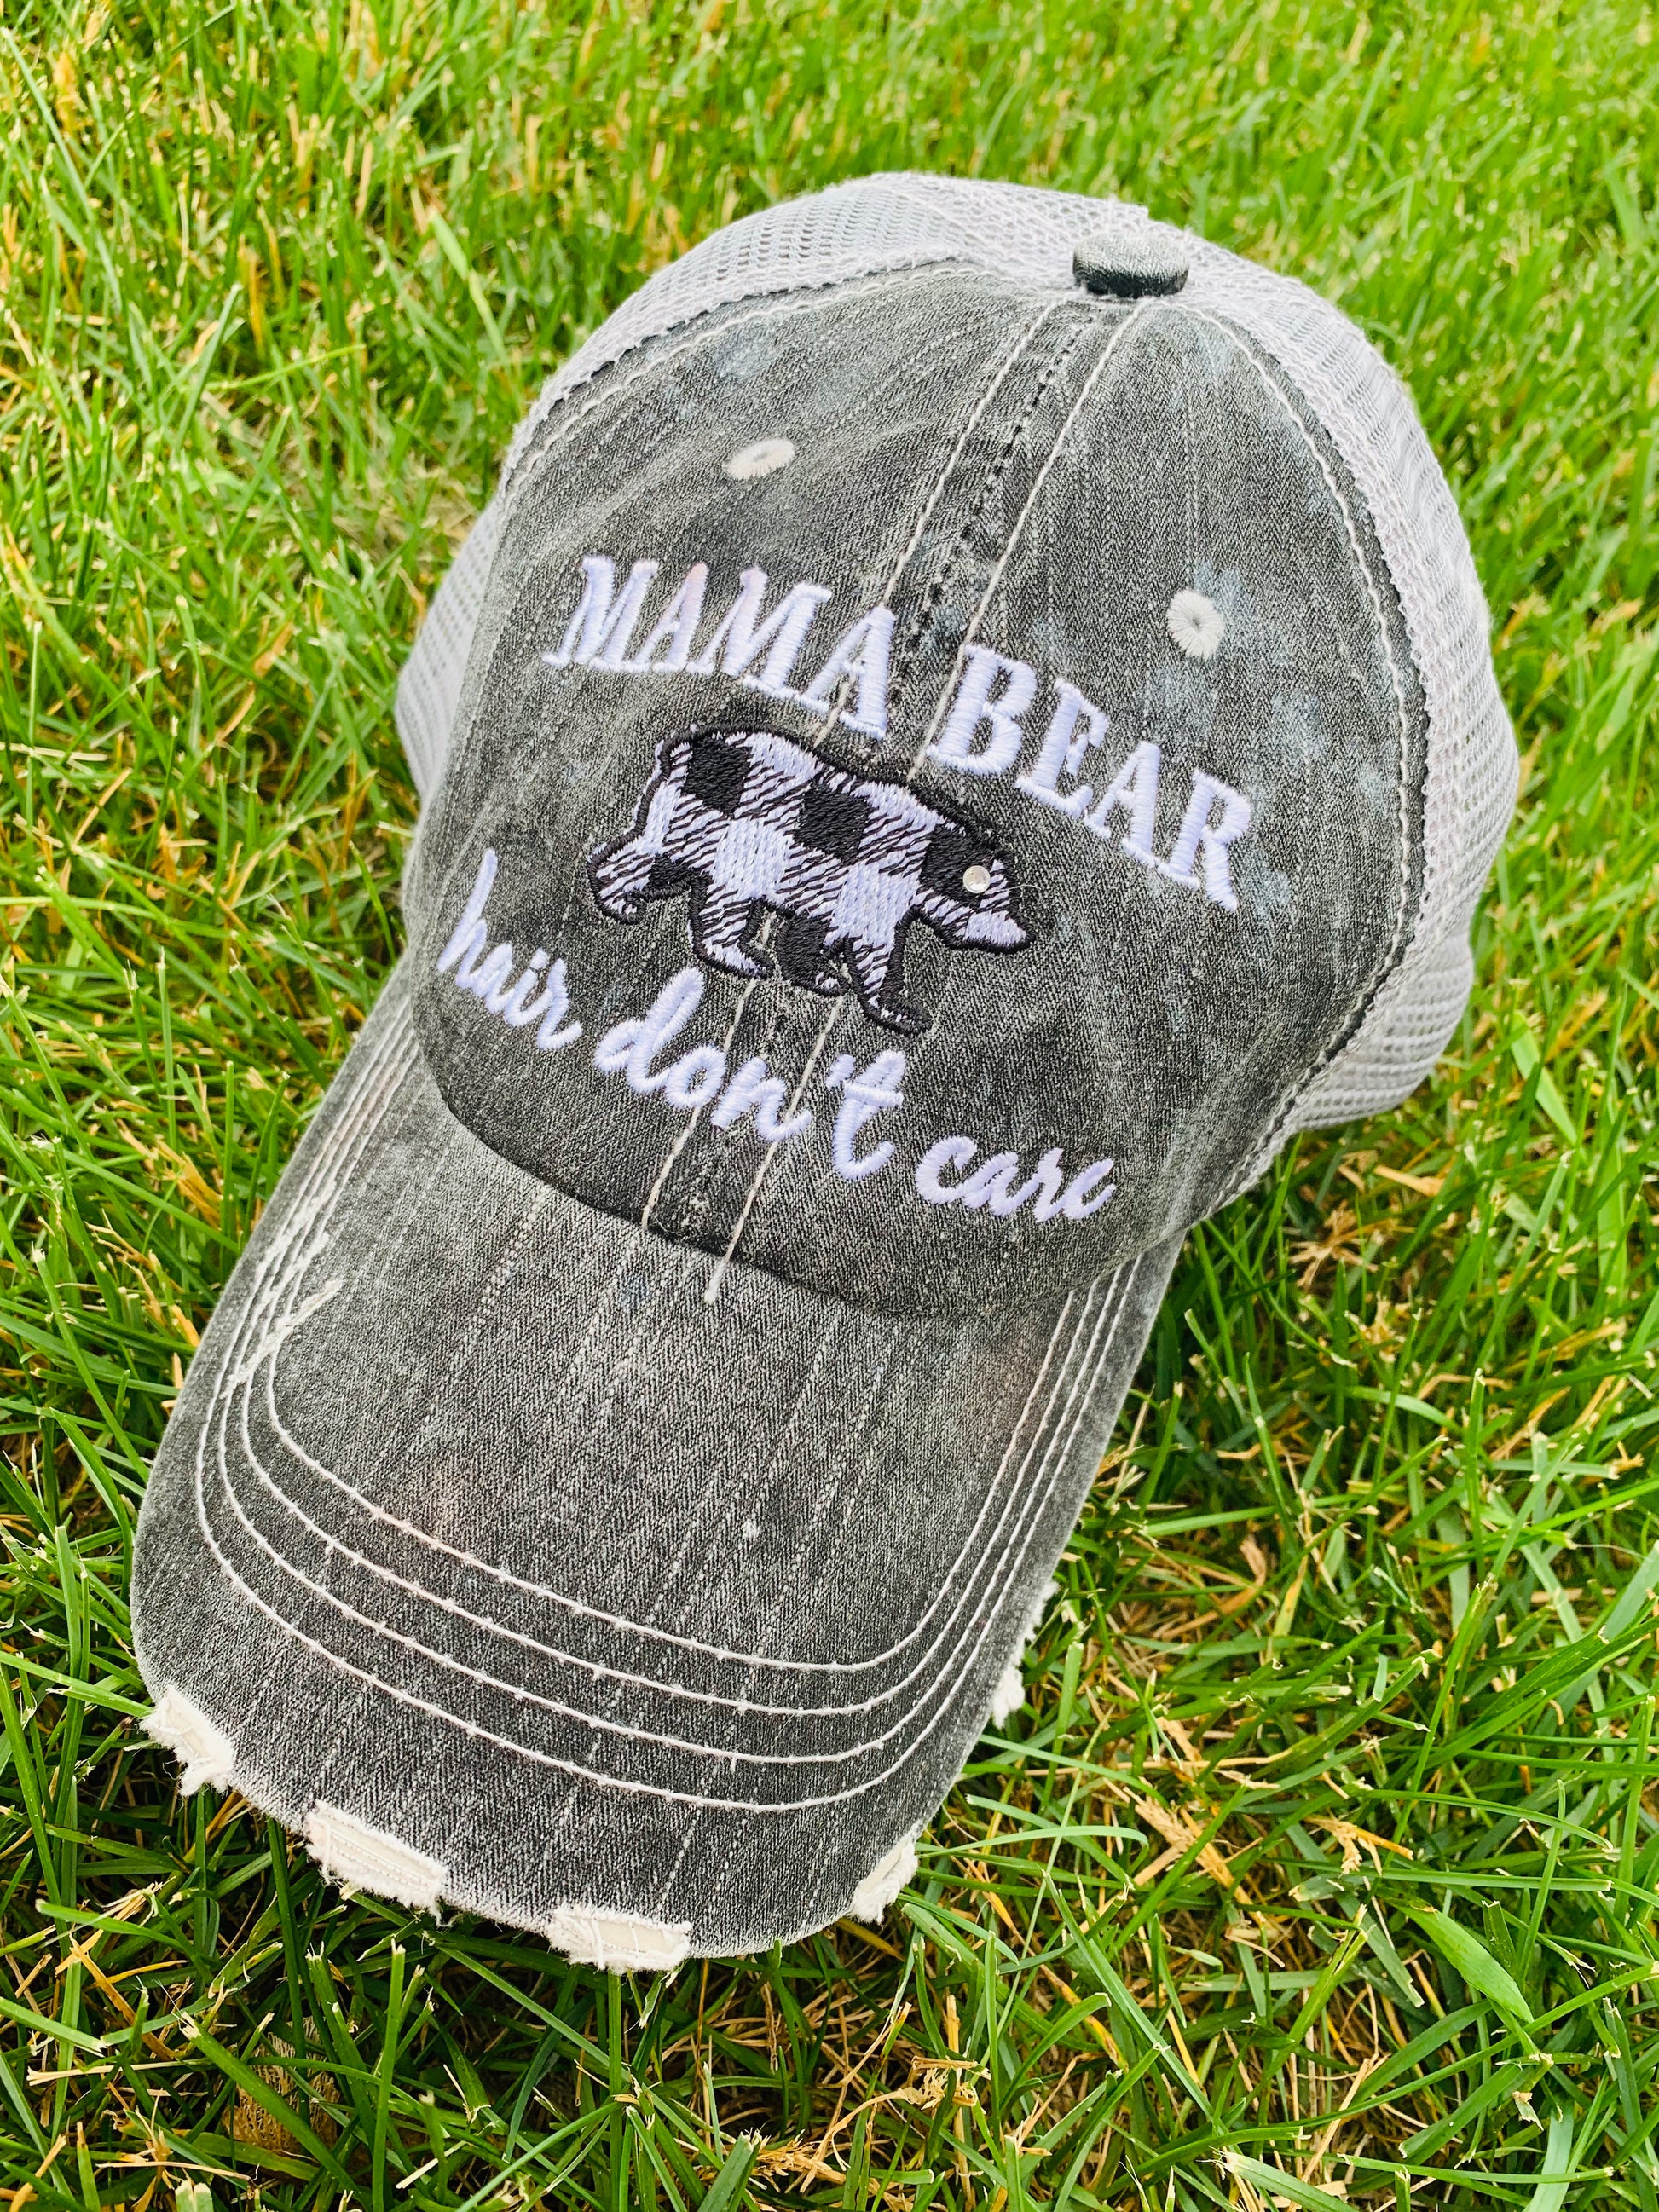 Hats { Mama bear hair dont care } Buffalo plaid, black/white bear • Trucker hat • Distressed • Mom hats • - Stacy's Pink Martini Boutique